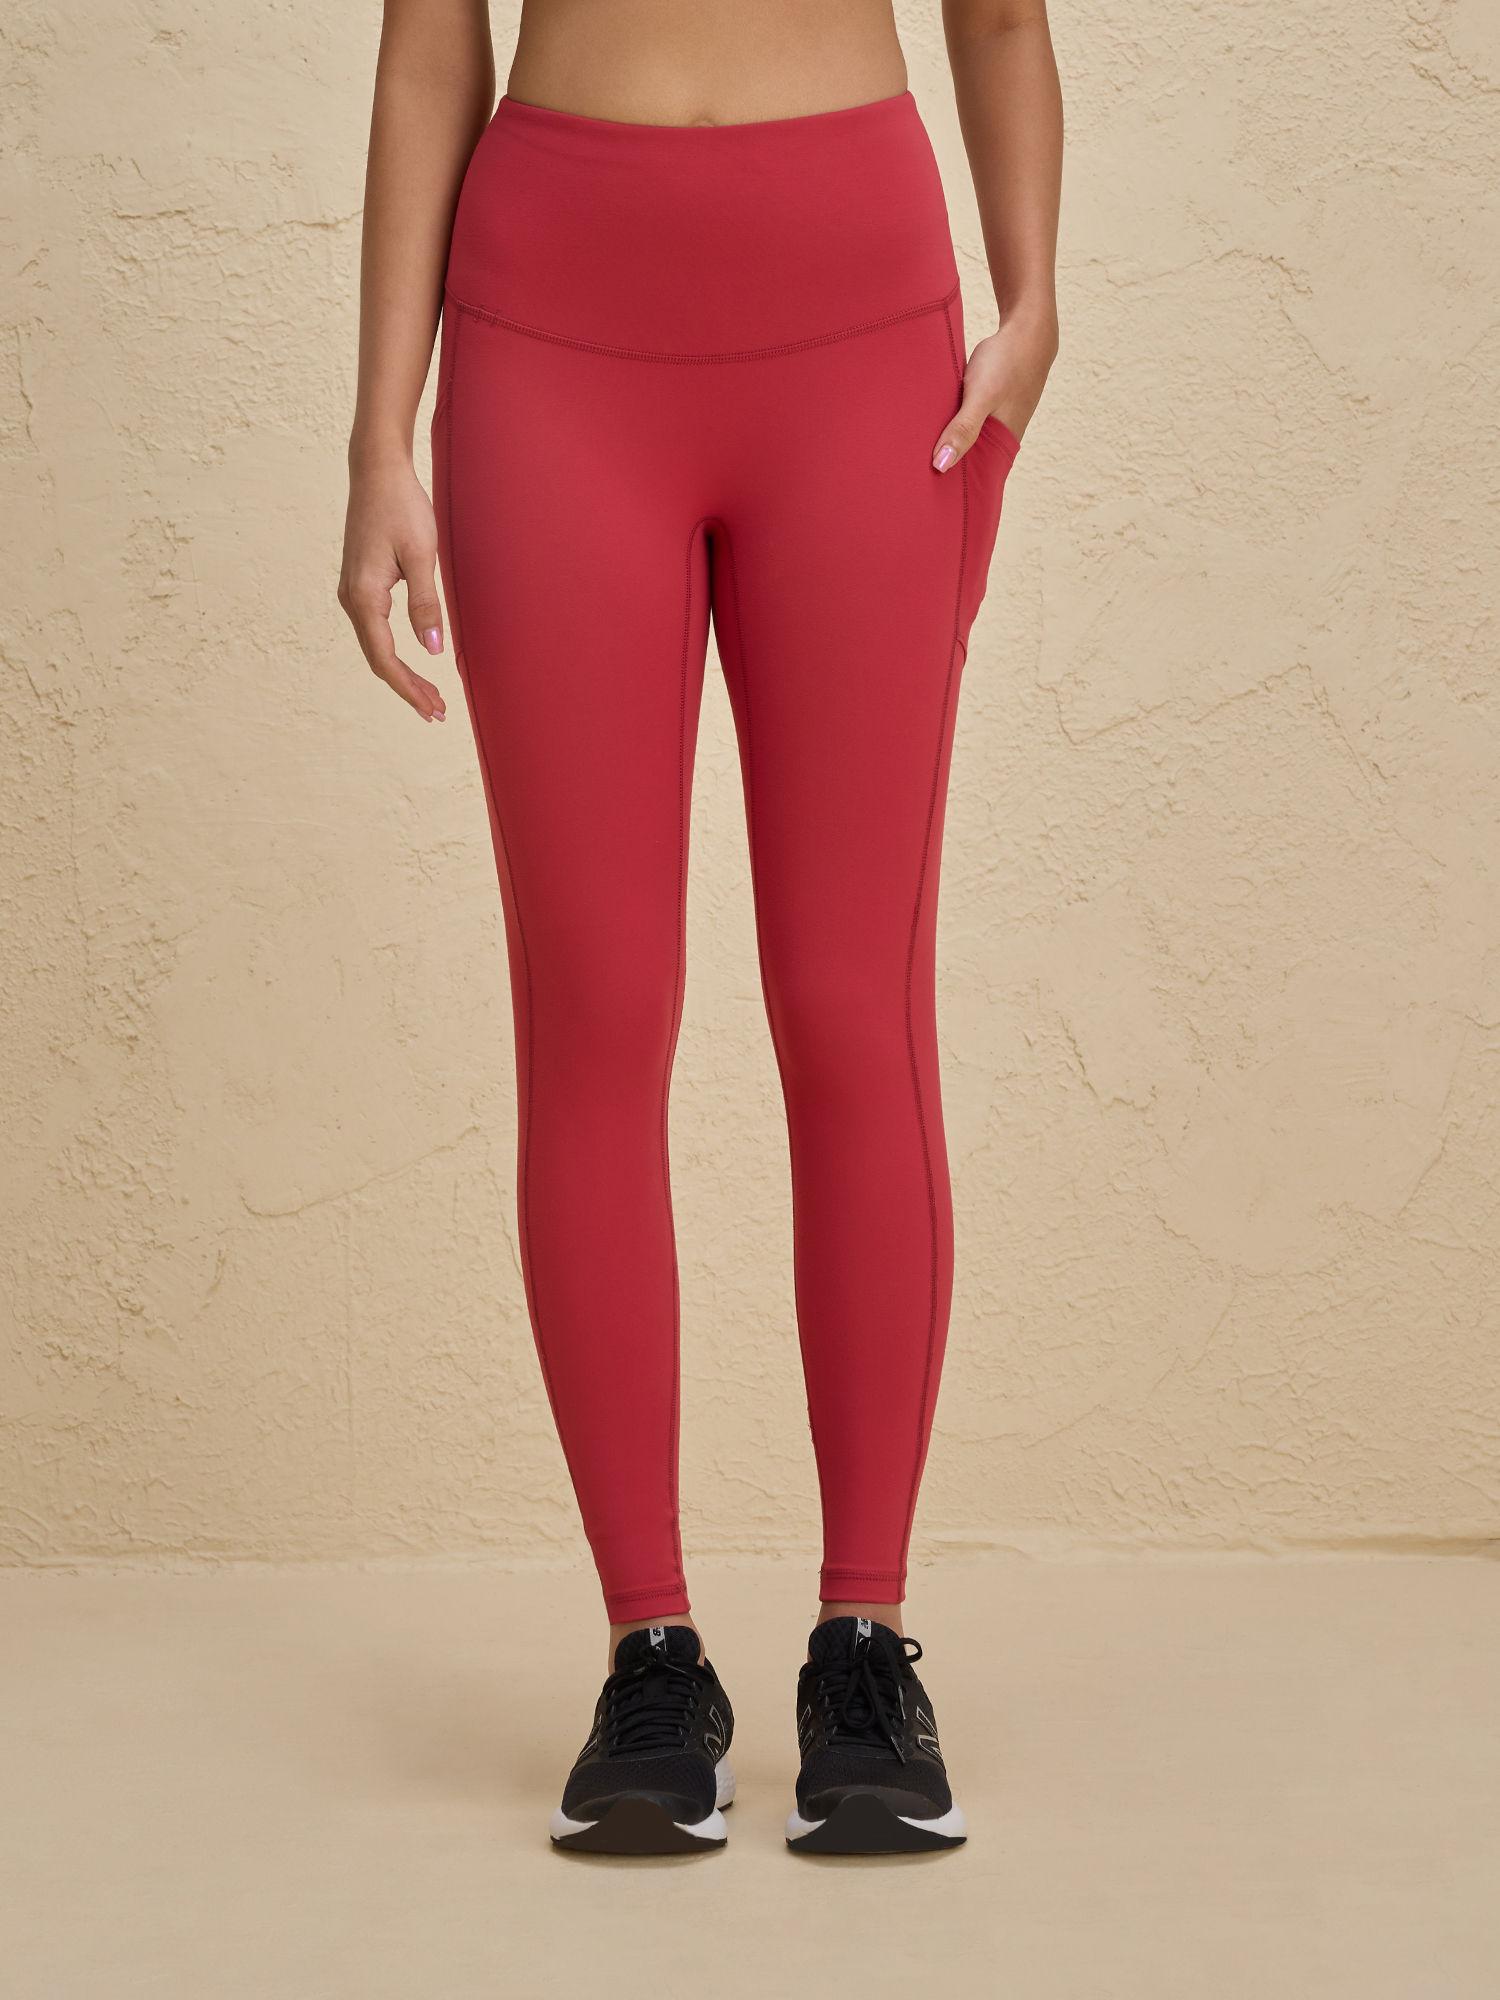 cloud soft & flattering full length leggings with pockets-nyk261-coral